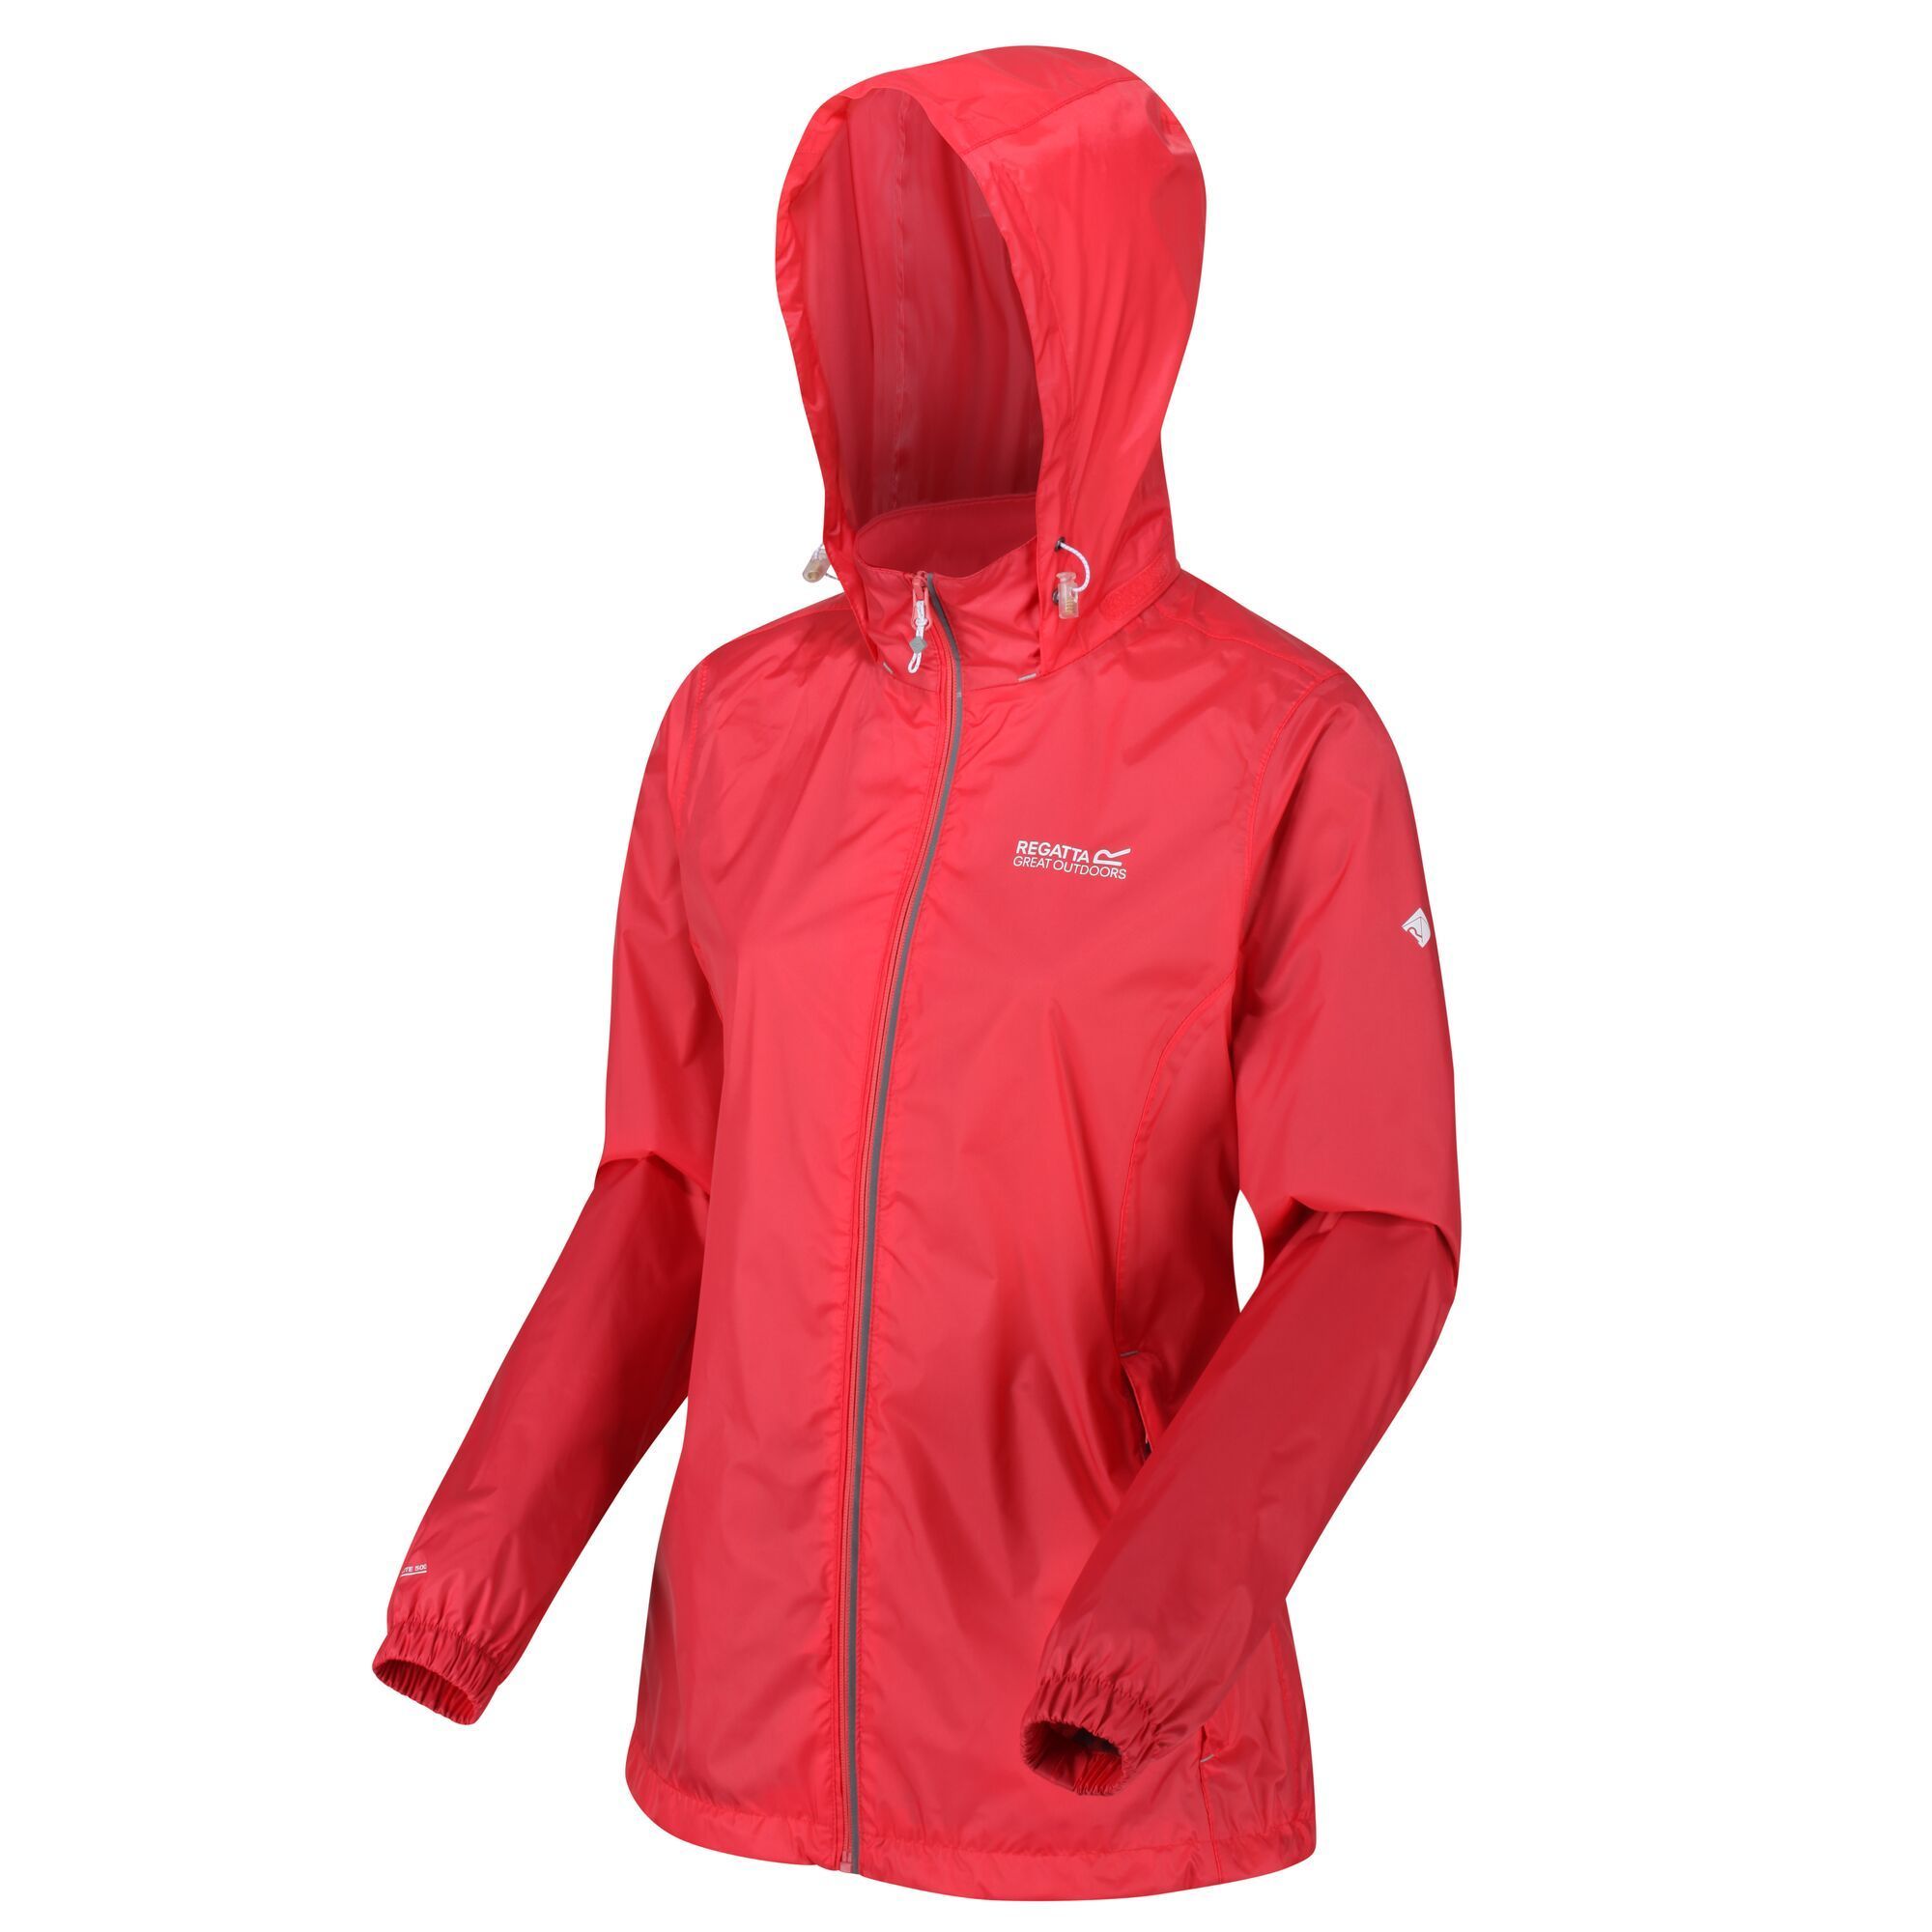 100% Polyamide. Super lightweight and packable waterproof jacket with soft mesh lining. ISOLITE 5,000 polyamide fabric with a durable water repellent finish. Sealed seams. Adjustable hem and hood.